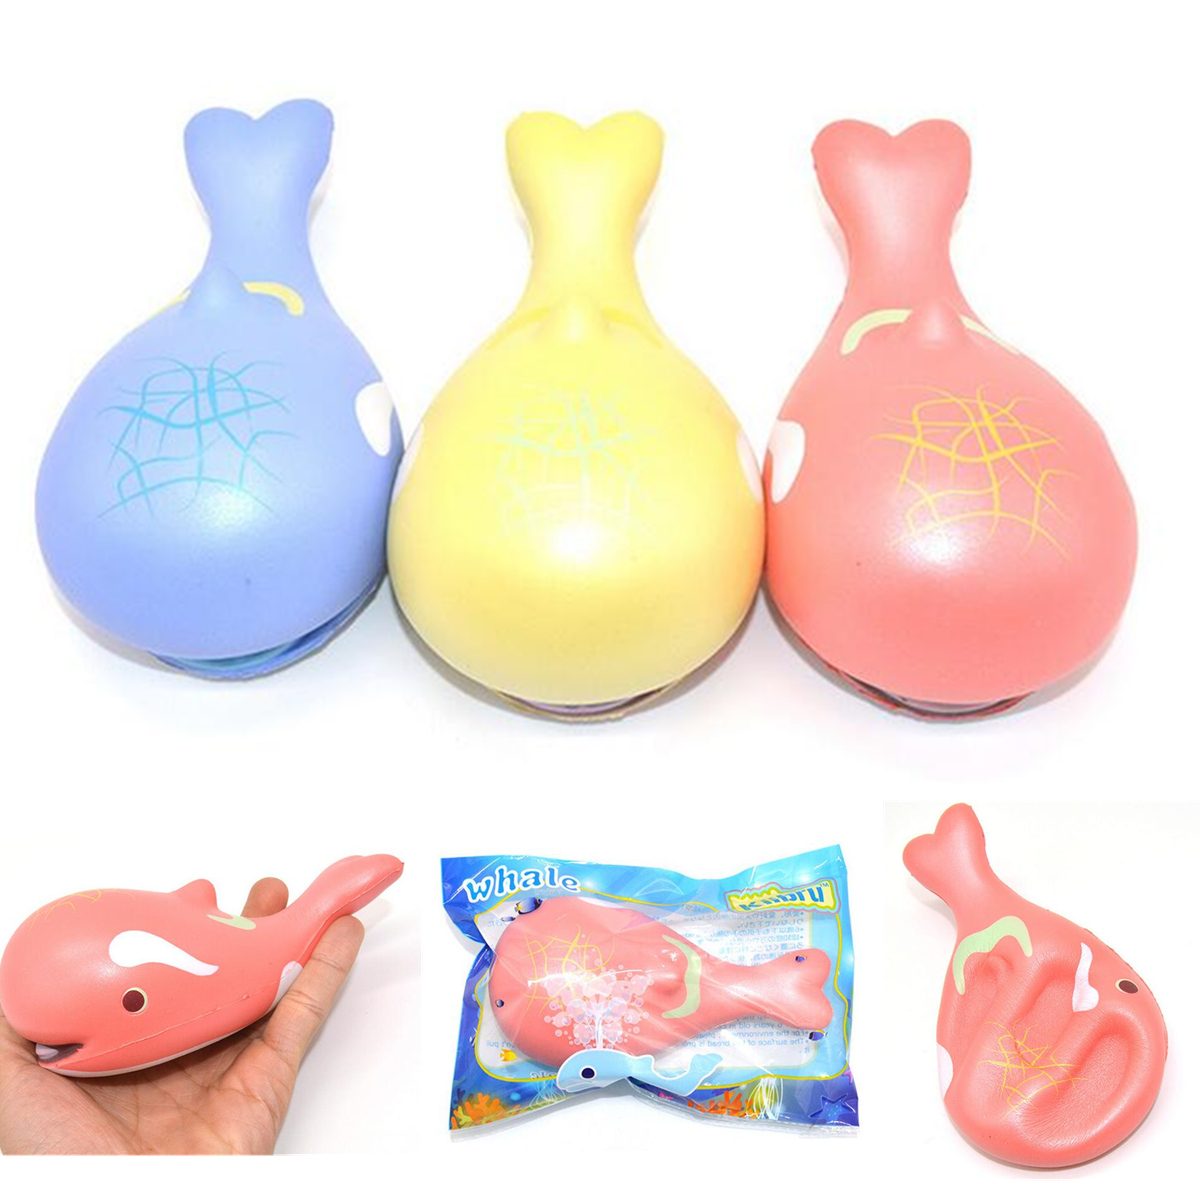 15cm-Whale-Squishy-Slow-Rising-Pressure-Release-Soft-Toy-With-Keychains-for-Iphone-Samsung-Xiaomi-1145805-6